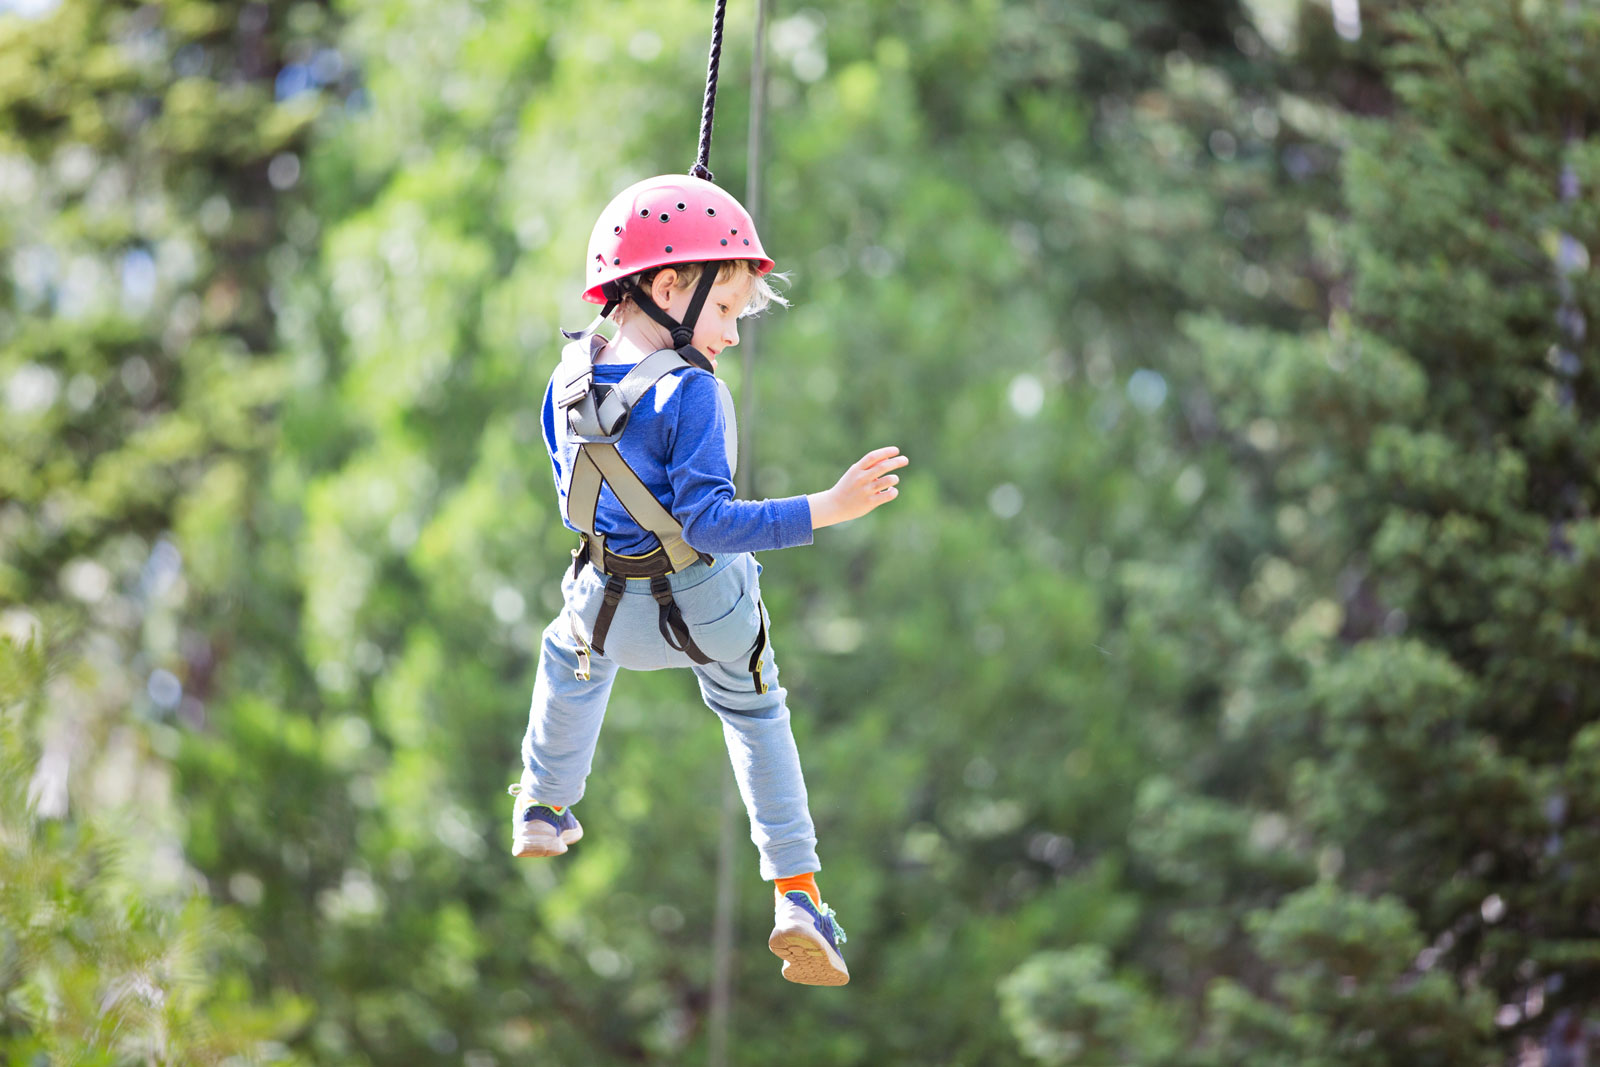 Tips for Organizing a Birthday Zip Line Adventure